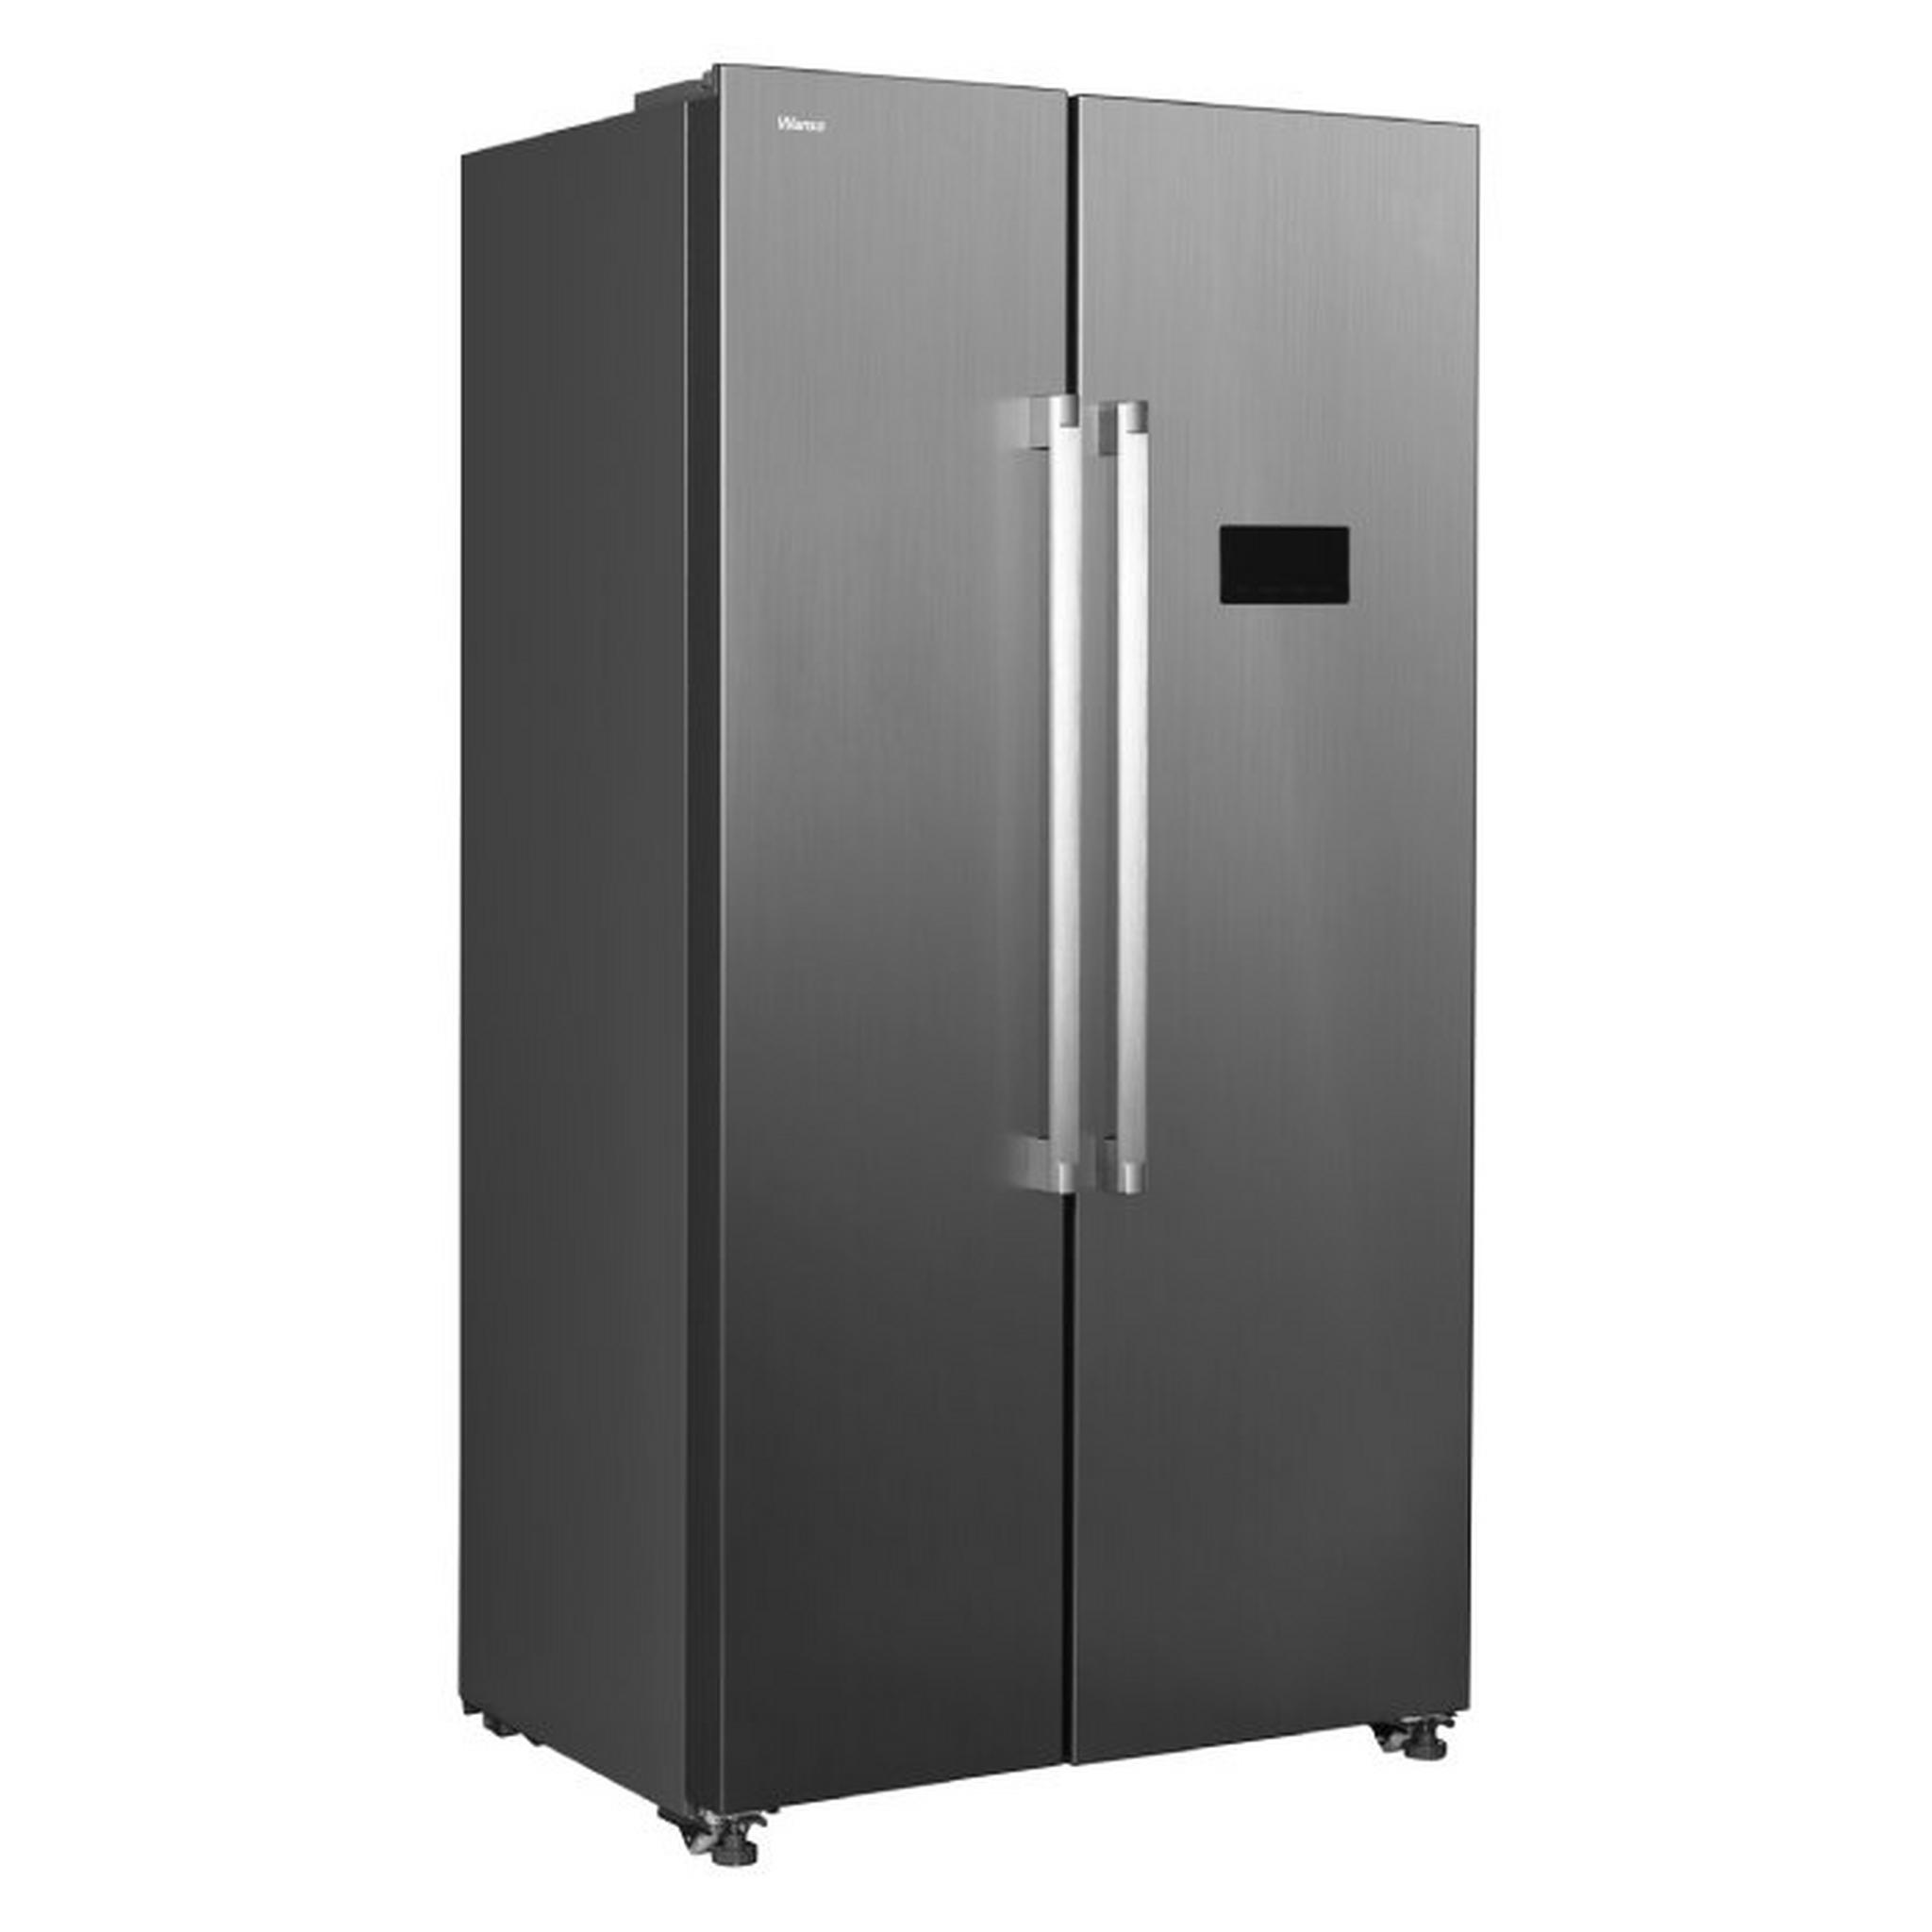 Wansa Side By Side Refrigerator and Freezer, 20CFT, 563-Liters, WRSG-563-NFIC82 - Grey